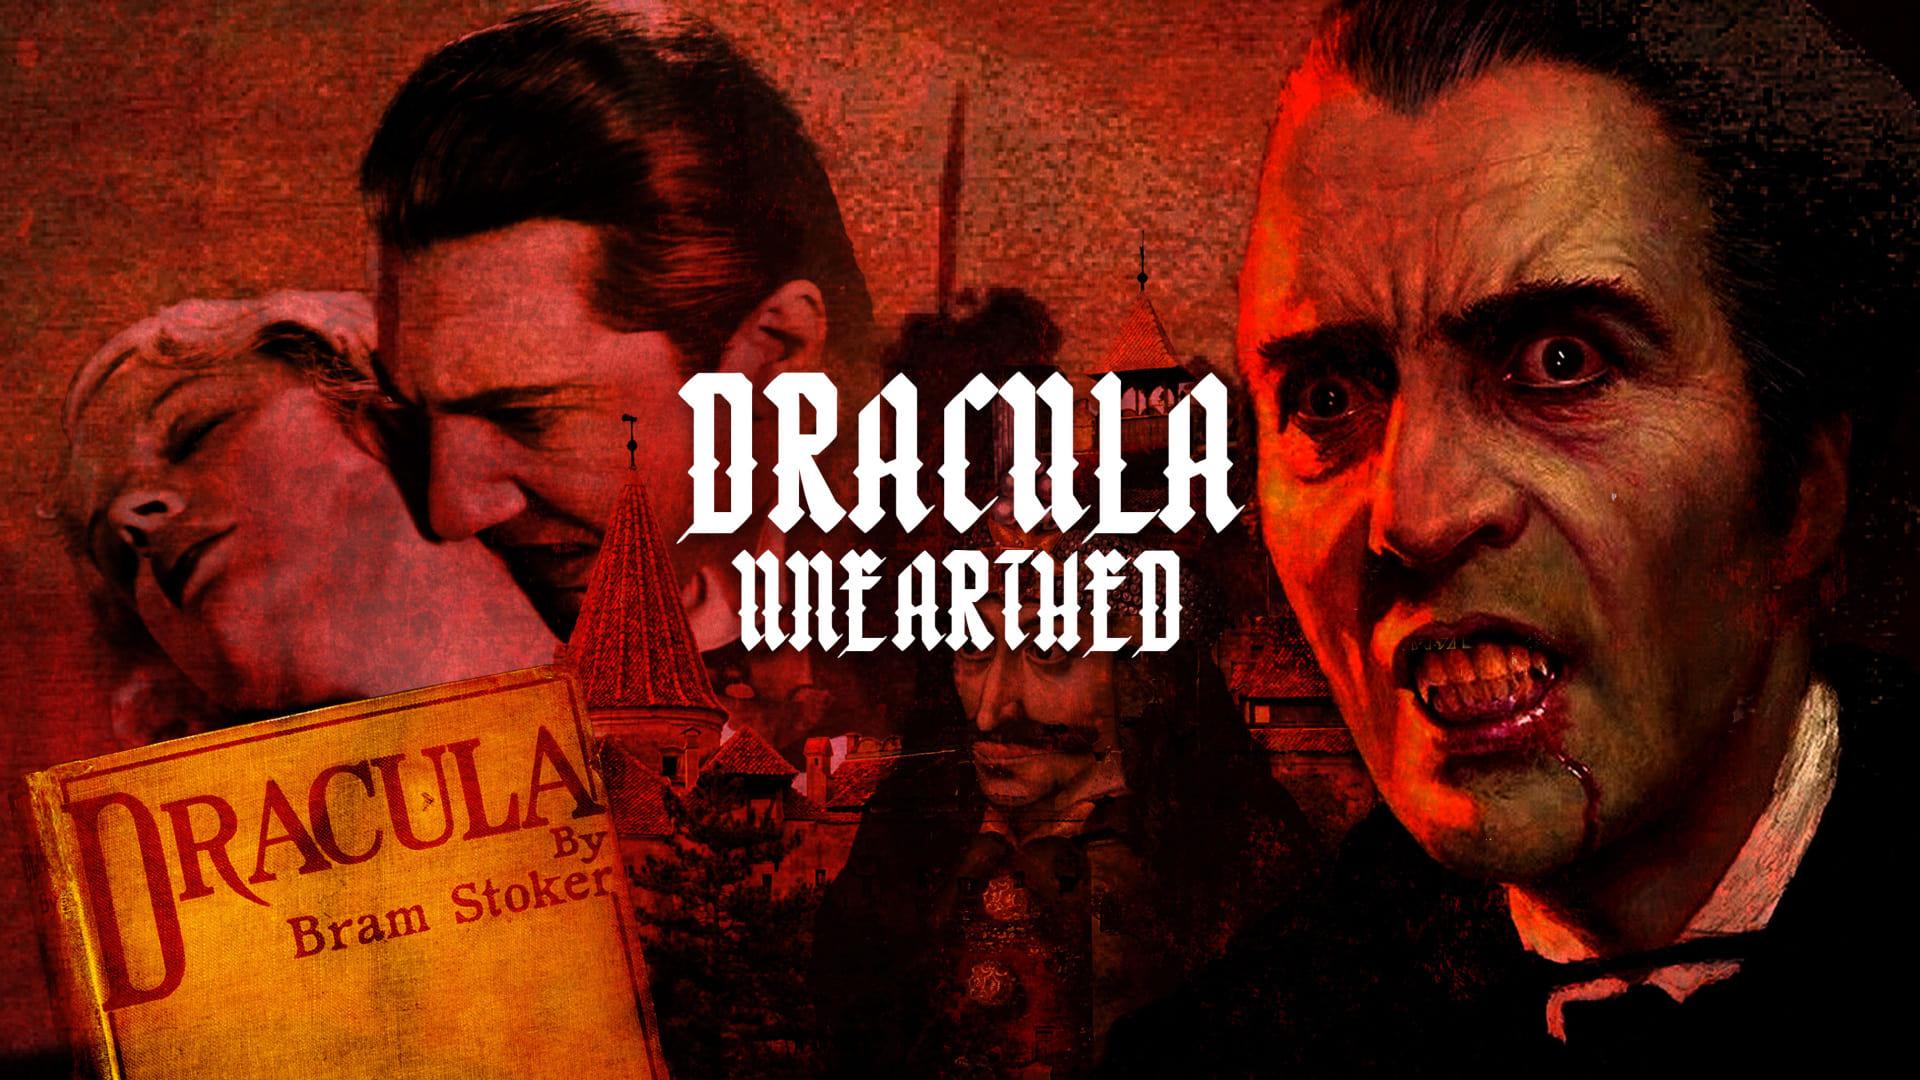 Dracula Unearthed backdrop